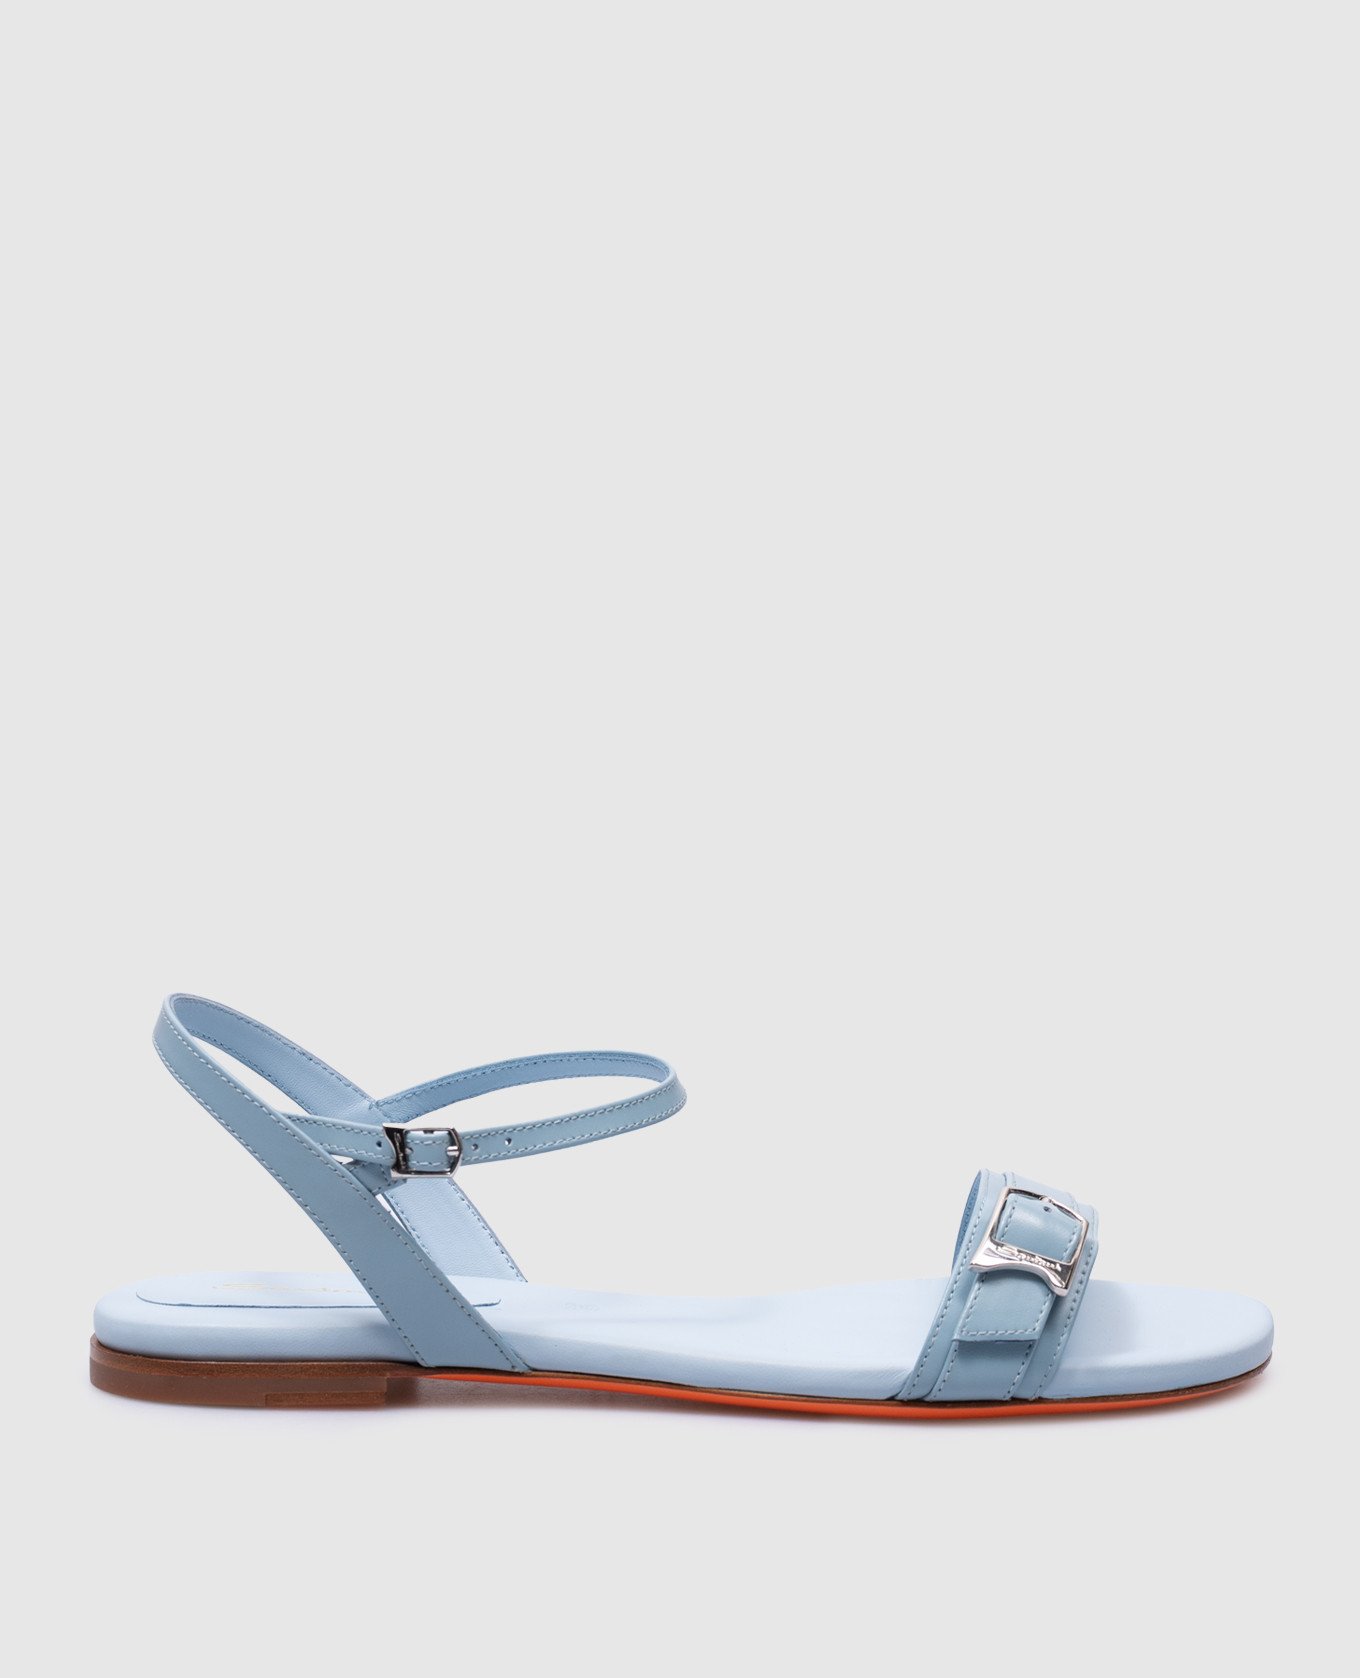 Blue leather sandals